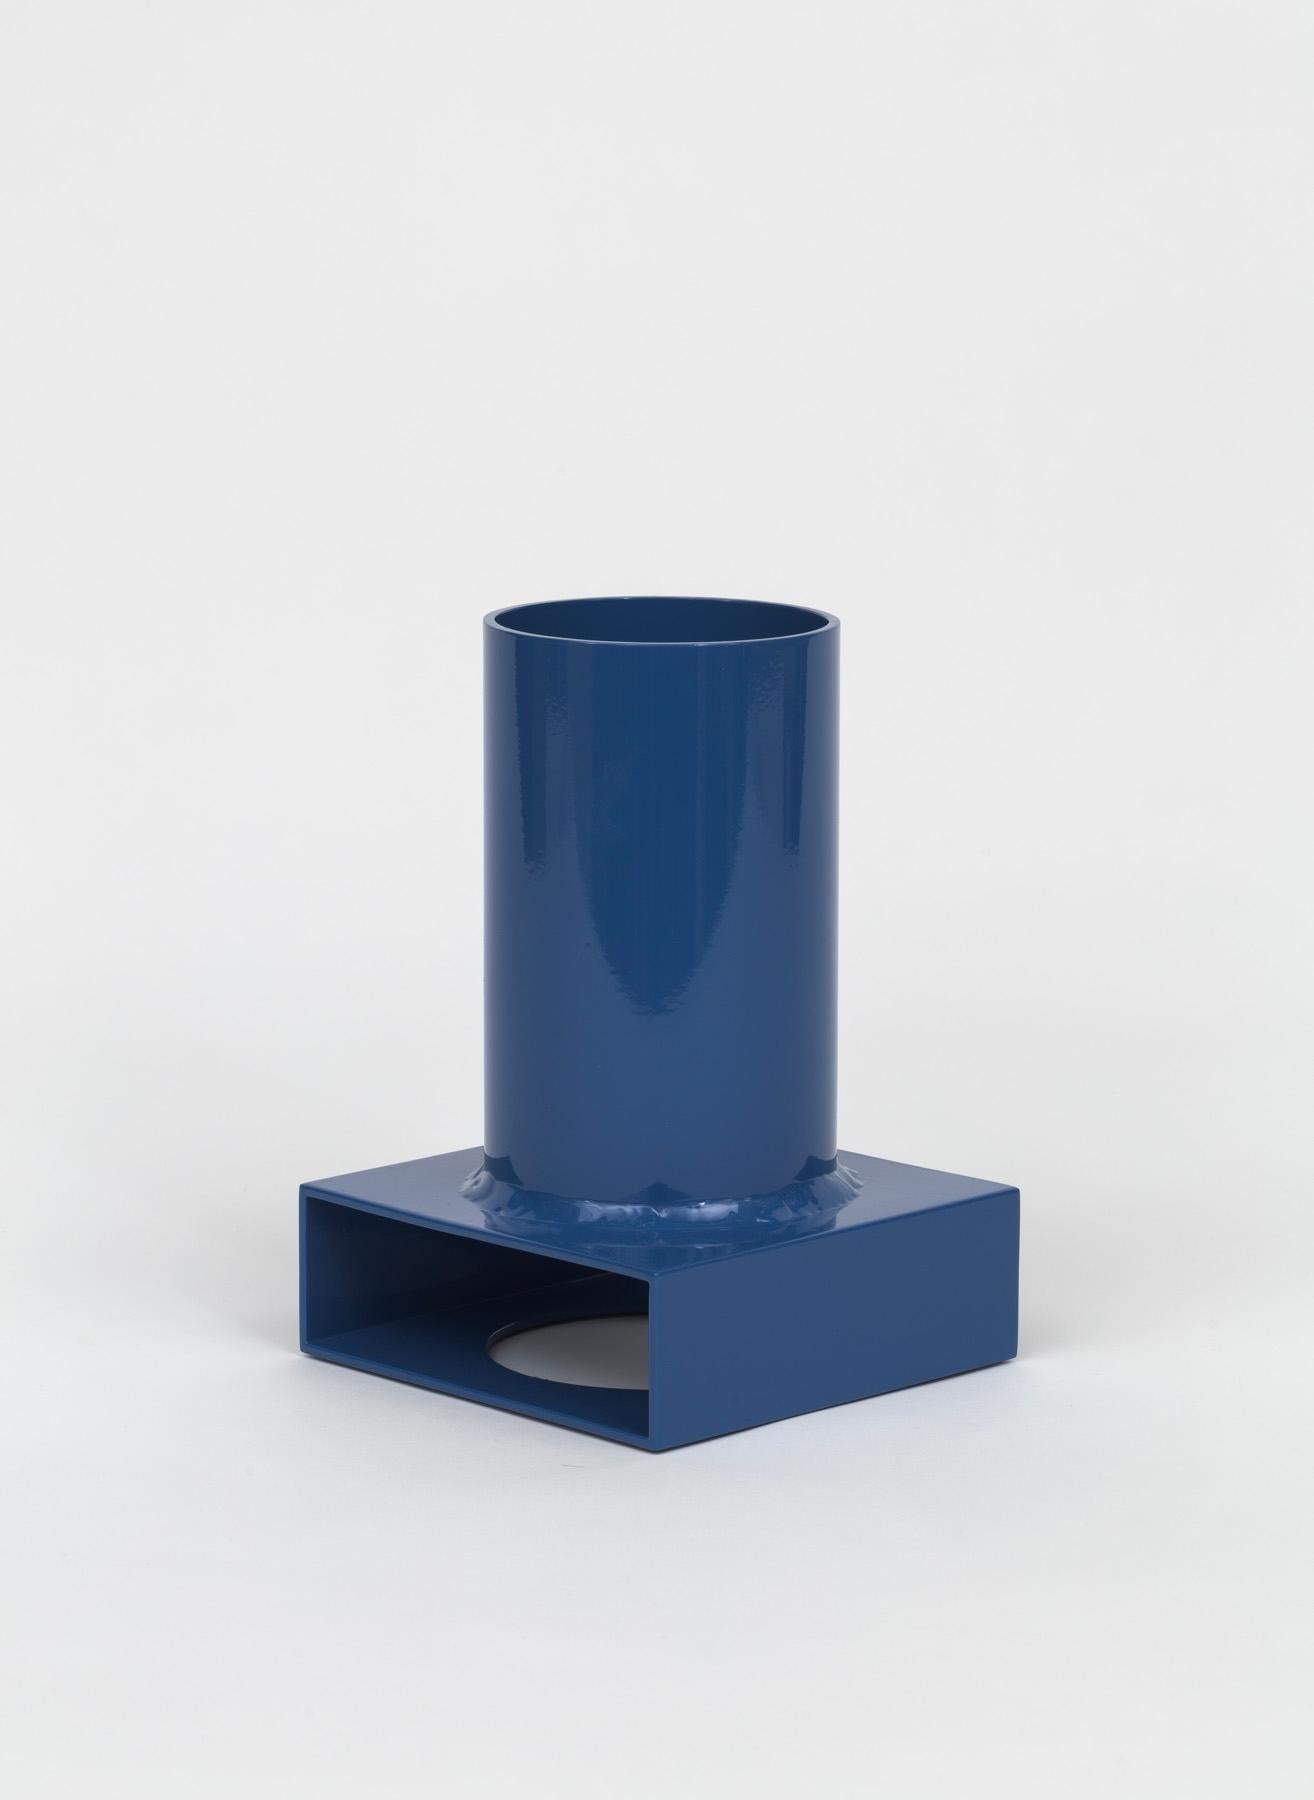 American Brute Tube Vase 002 in Deep Adult Blue Powder-Coated Aluminum, Limited Edition For Sale